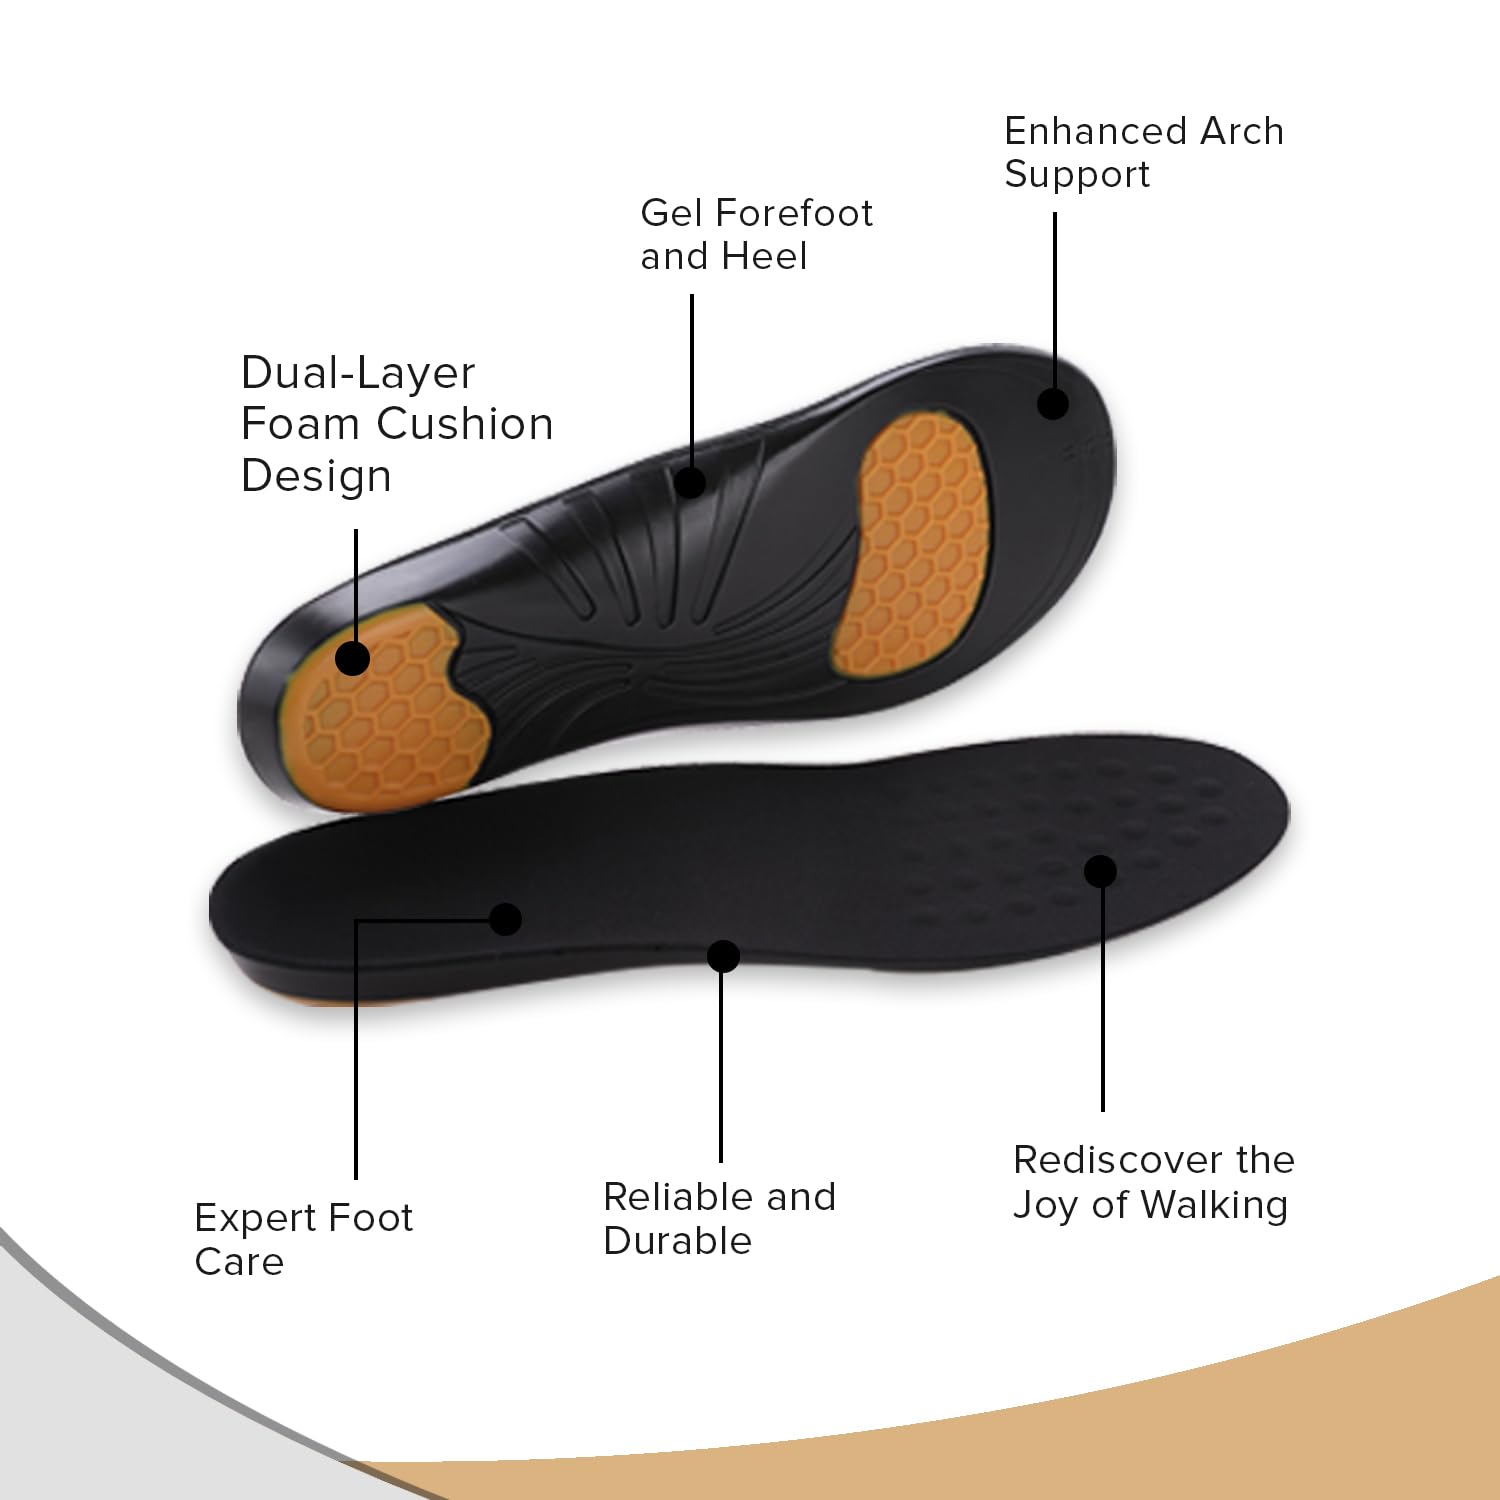 Dr Foot Stabilizing Support Insoles | Breathable Fabric for Dry Feet | Dual-Layer Foam Cushion Design | Maximum Comfort | Gel Forefoot | Heel for Impact Protection | - 1 Pair - (Small Size)